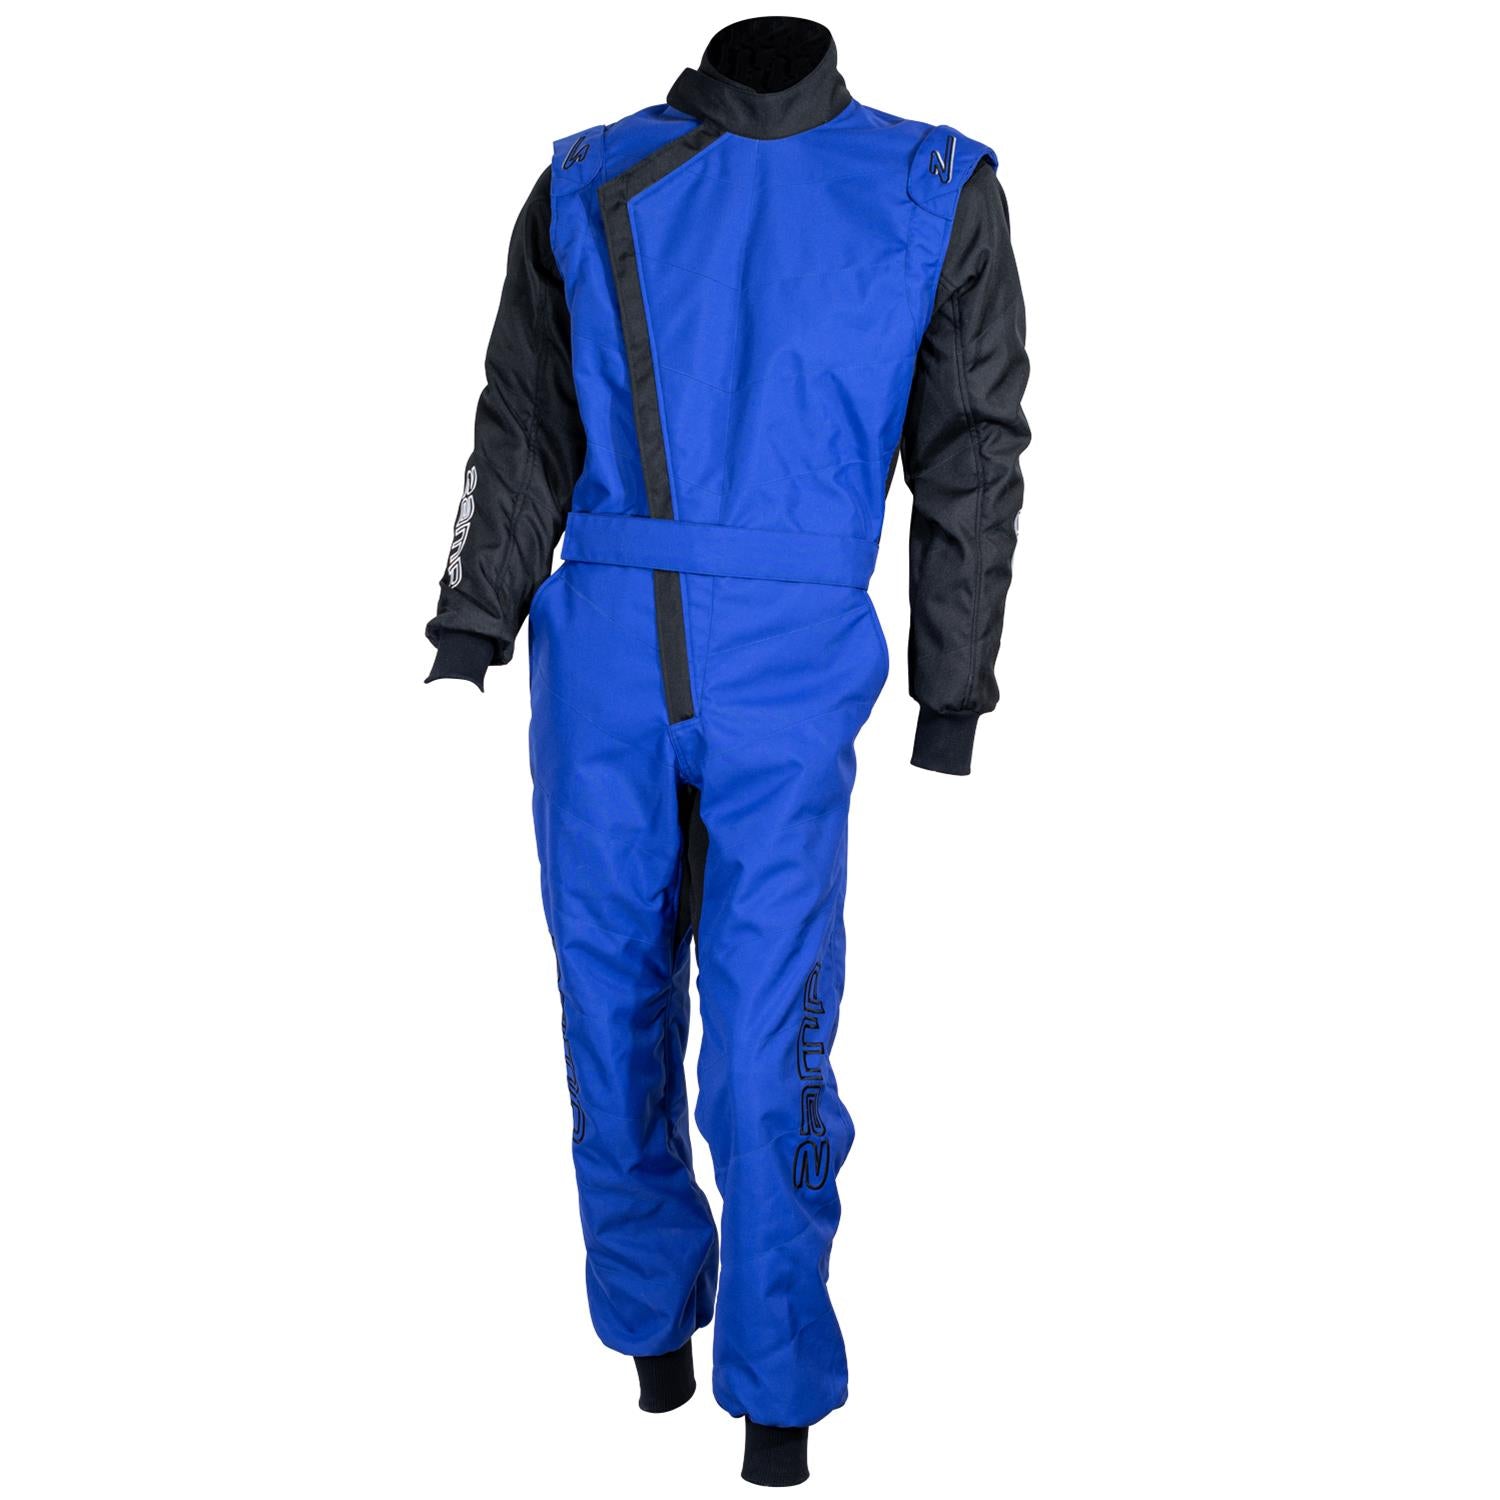 ZAMP Racing ZK-40 Youth Suit Blue R060004YL